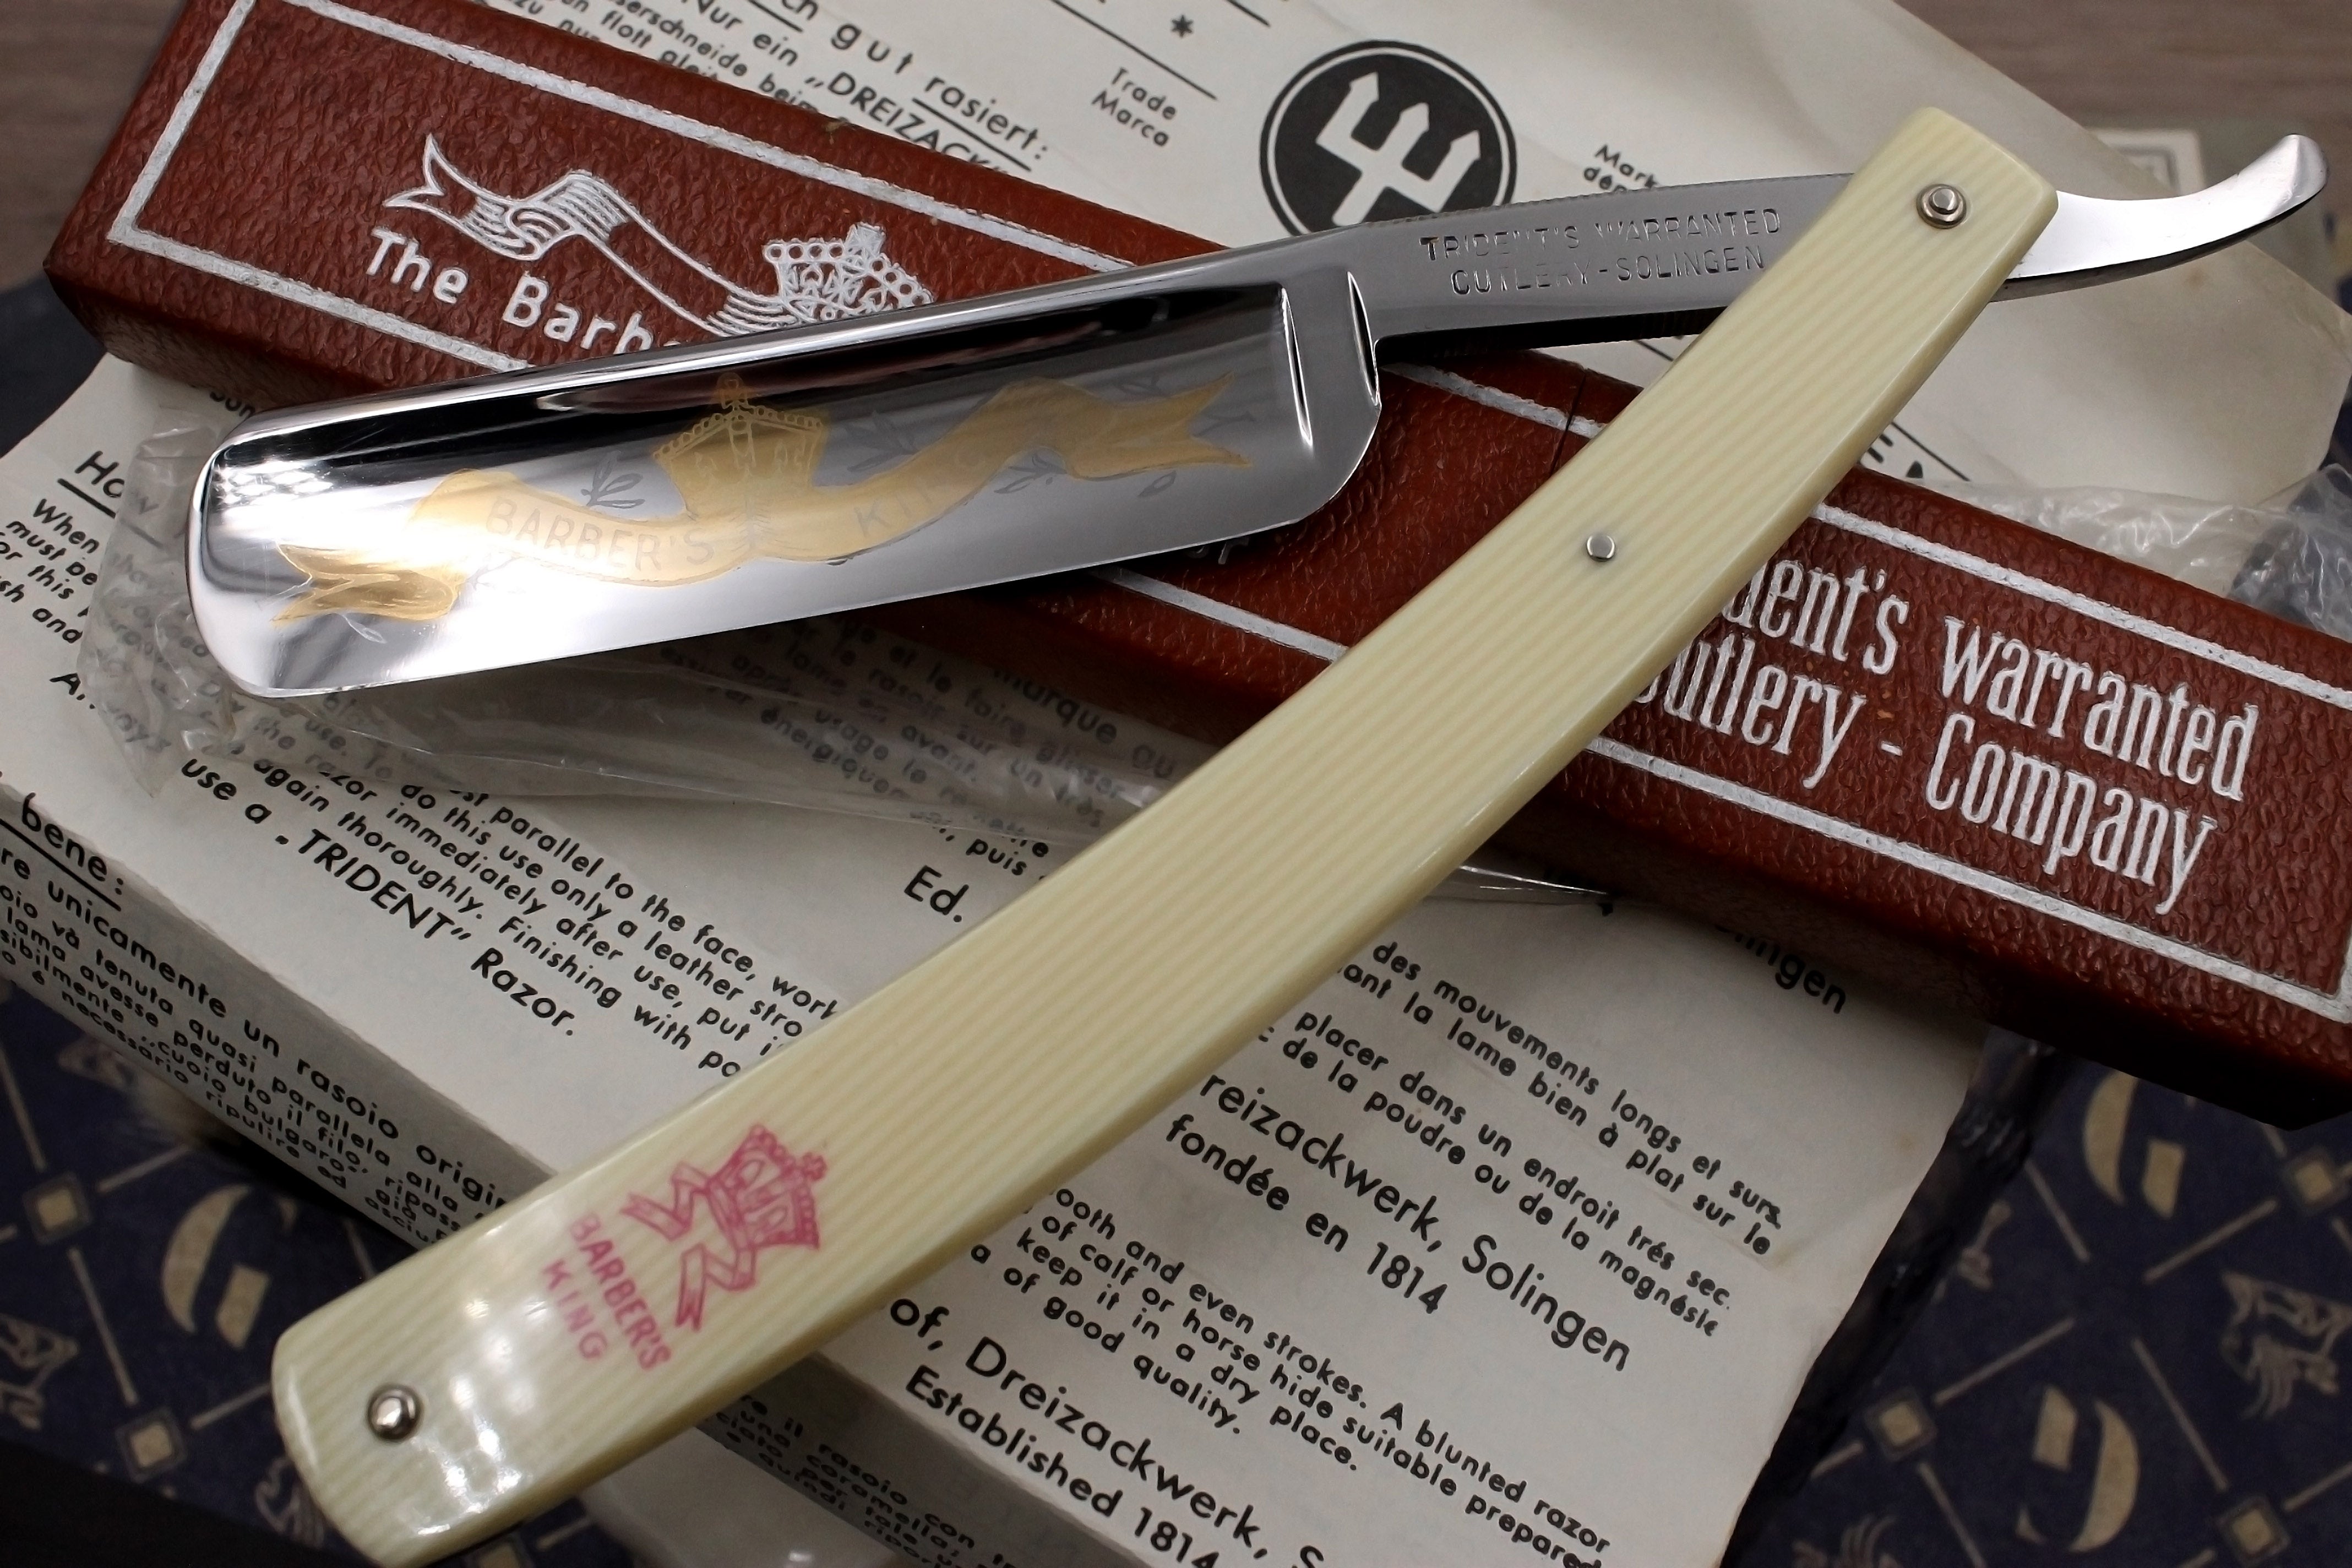 Ed Wusthoff Barber's King - Like New NOS? 13/16 Full Hollow Blade - Vintage Solingen Straight Razor - Shave Ready